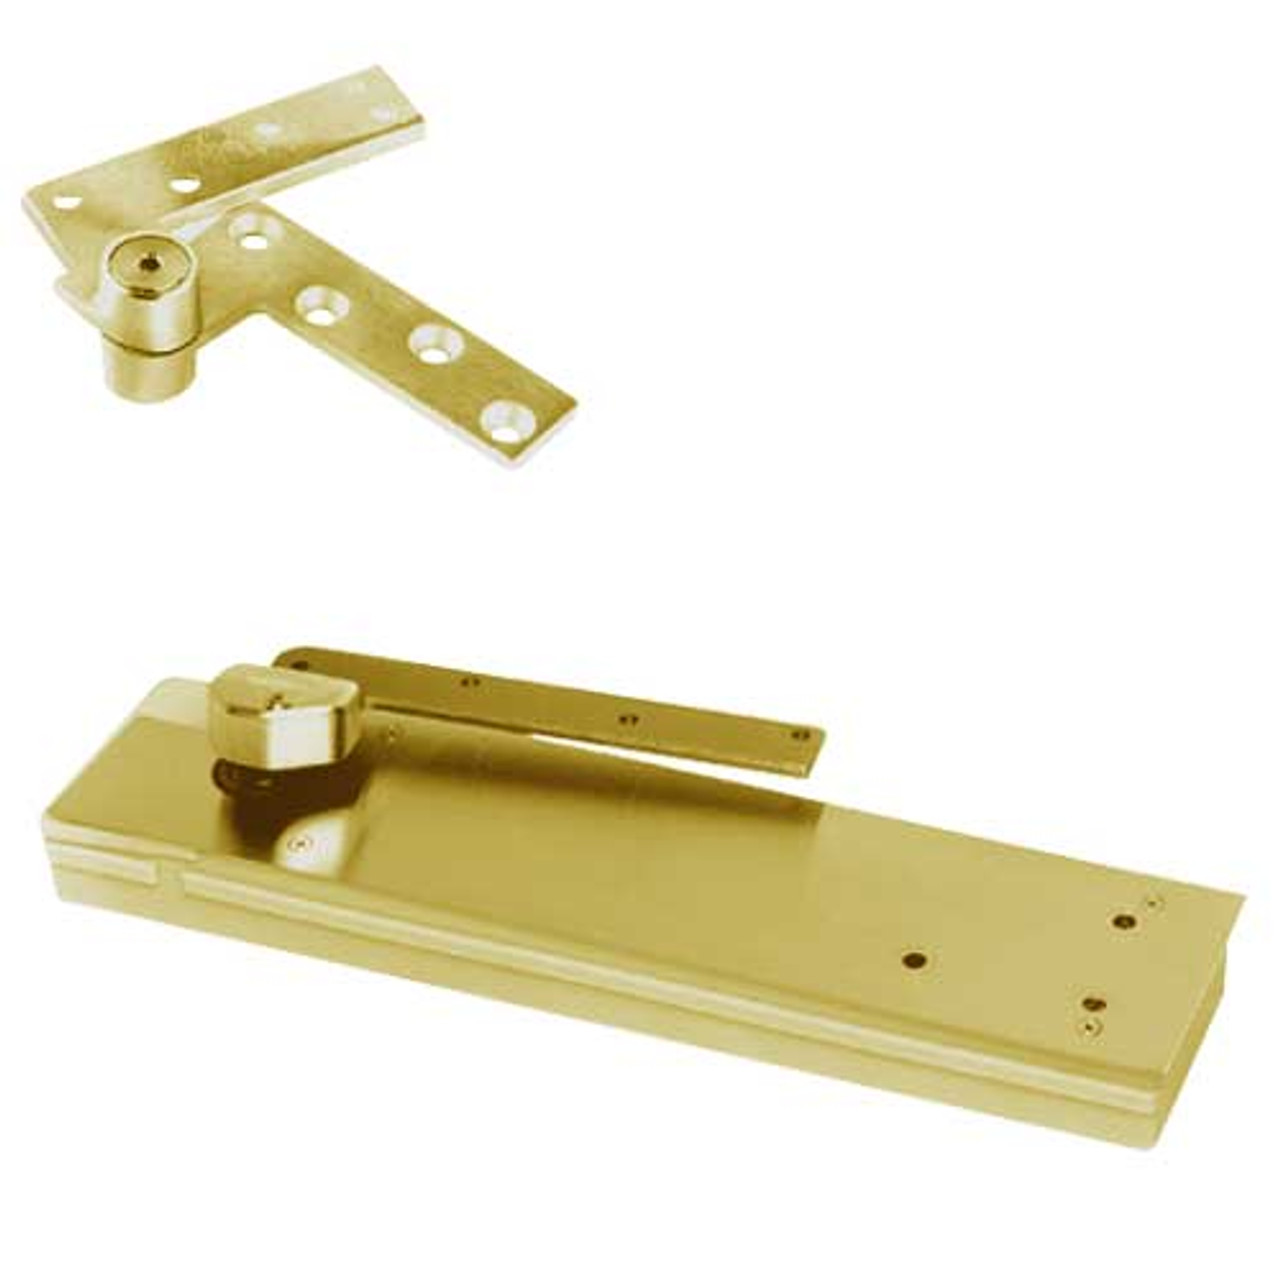 5103ABC180-RH-606 Rixson 51 Series 3/4" Offset Hung Shallow Depth Floor Closers in Satin Brass Finish